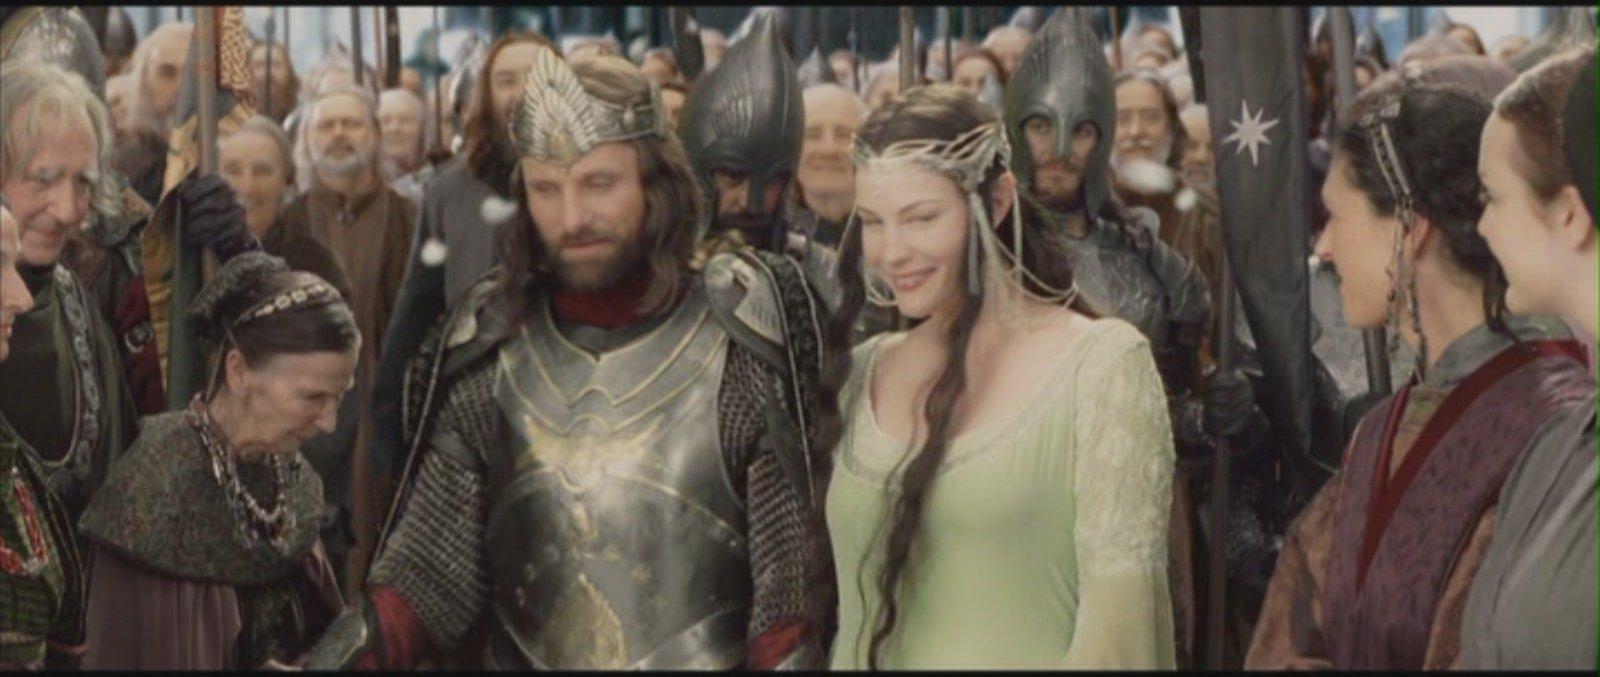 Aragorn and Arwen image Arwen and Aragorn of the Rings